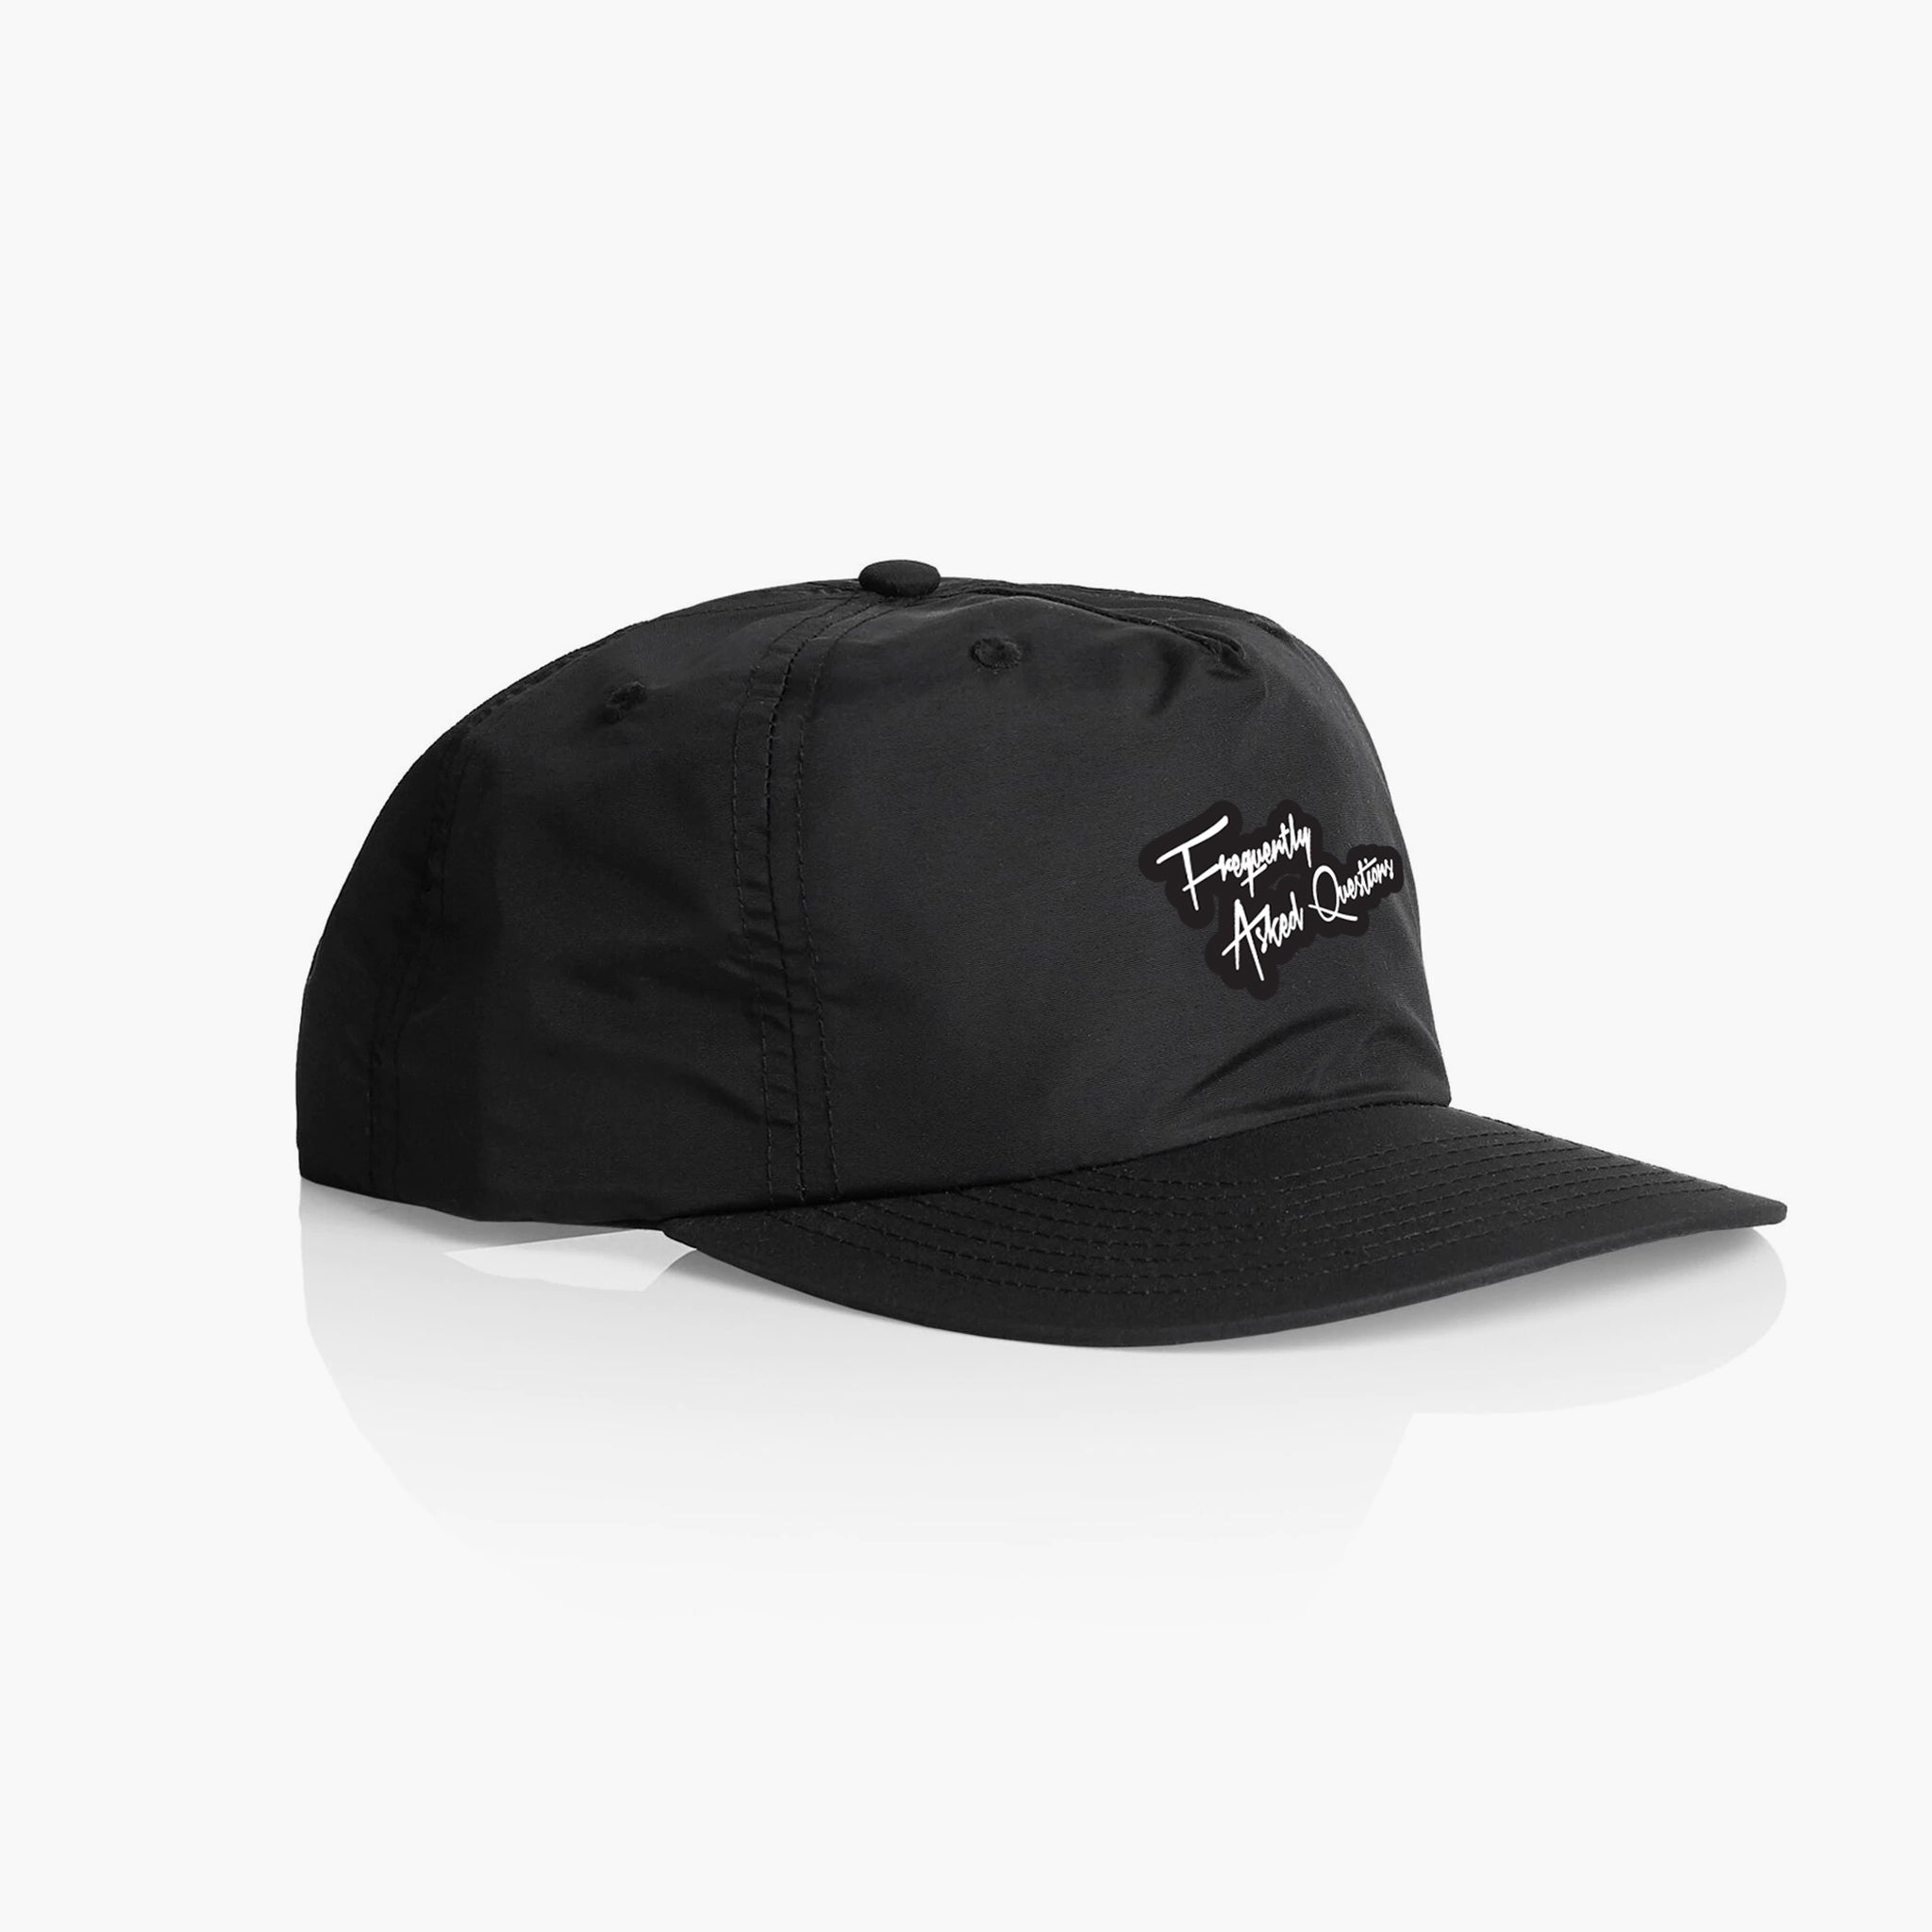 FAQ Nylon Cap - Frequently Asked Questions